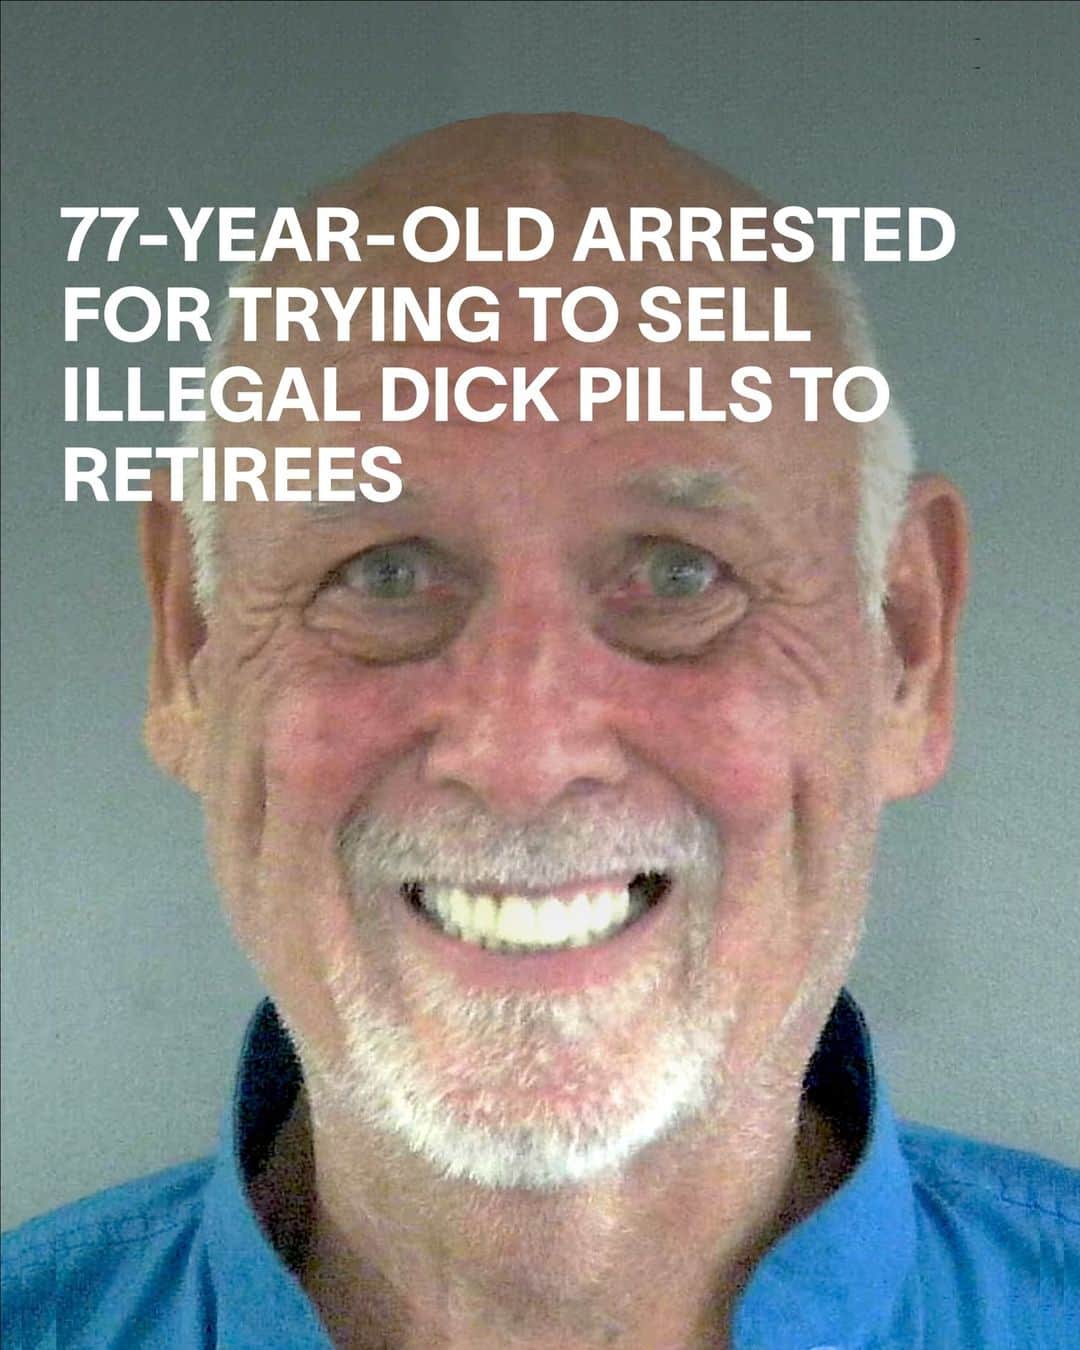 VICEのインスタグラム：「Old people still get horny, they just occasionally need a little help acting on that horniness. ⁠ ⁠ Enter 77-year-old Reginald Kincer, who was arrested for allegedly buying over $1,800 of erectile dysfunction drugs without a prescription, with intent to sell them to the residents of Florida’s giant retirement community, The Villages. ⁠ ⁠ Kincer pleaded not guilty and agreed to have his case heard before a magistrate judge instead of a jury. If he’s convicted, he'll face up to a year in federal prison and a fine of up to $10,000. Free my man Reggie. ⁠ ⁠ If you've seen the Hulu documentary 'Some Kind of Heaven', you'll be familiar with The Villages – a community of 81,000 people aged over 55, home to multiple golf courses, billiards rooms and other activities beloved by seniors, plus a notorious swingers scene and a thriving black market for viagra pills. ⁠ ⁠ Kincer – who's been arrested in the past for MDMA and magic mushroom possession – features in the documentary, talking about how he "really likes stimulating [himself] with drugs."」